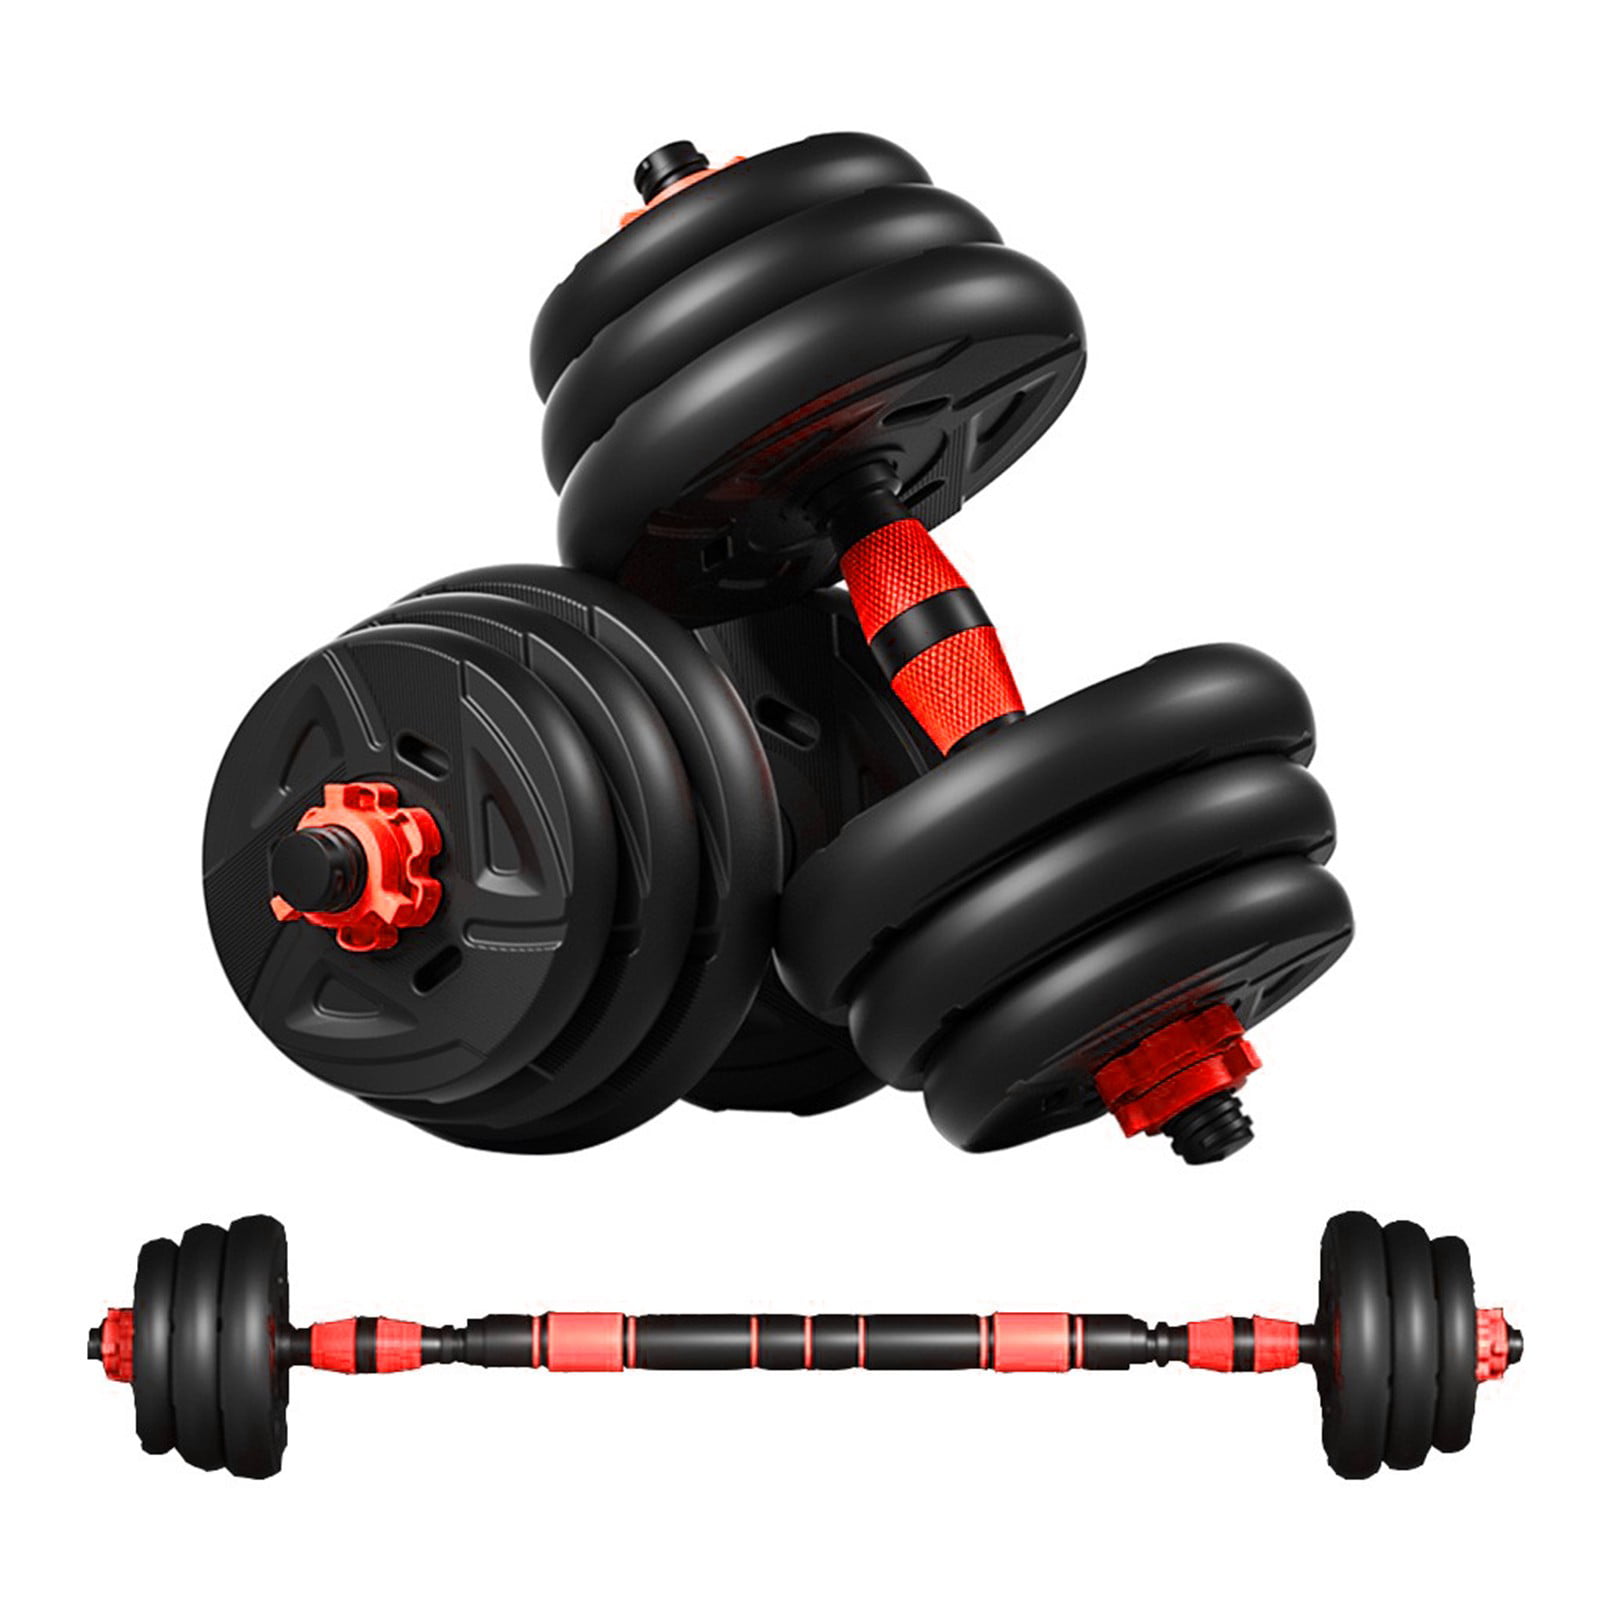 UK 10-20KG DUMBELLS FITNESS BODY BUILDING PAIR OF WEIGHTS BARBELL/DUMBBELL SET 